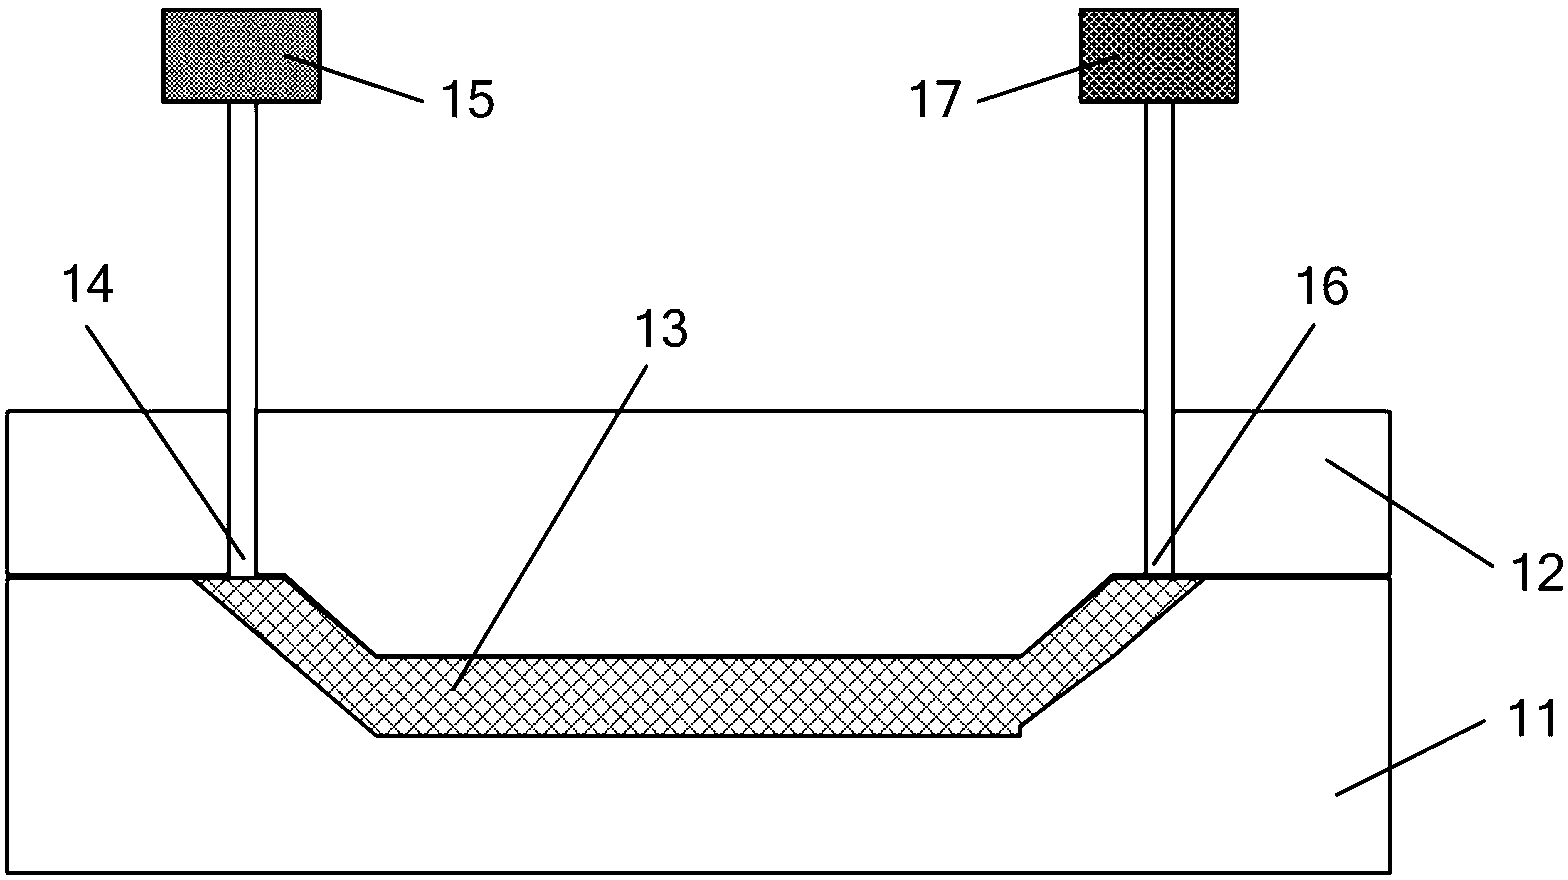 Spacecraft shell material as well as RTM (Resin Transfer Molding) molding technology and injection molding system thereof